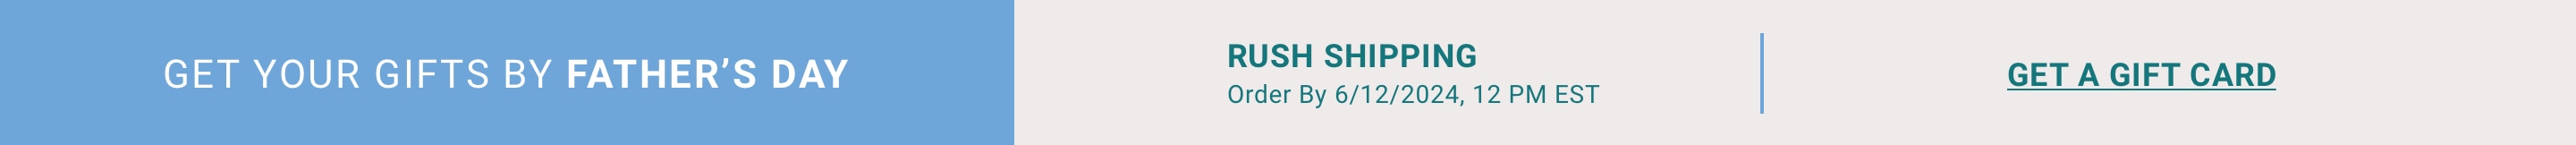 Get your gifts by Father’s Day - Rush Shipping Order by 6/12/2024, 12PM EST